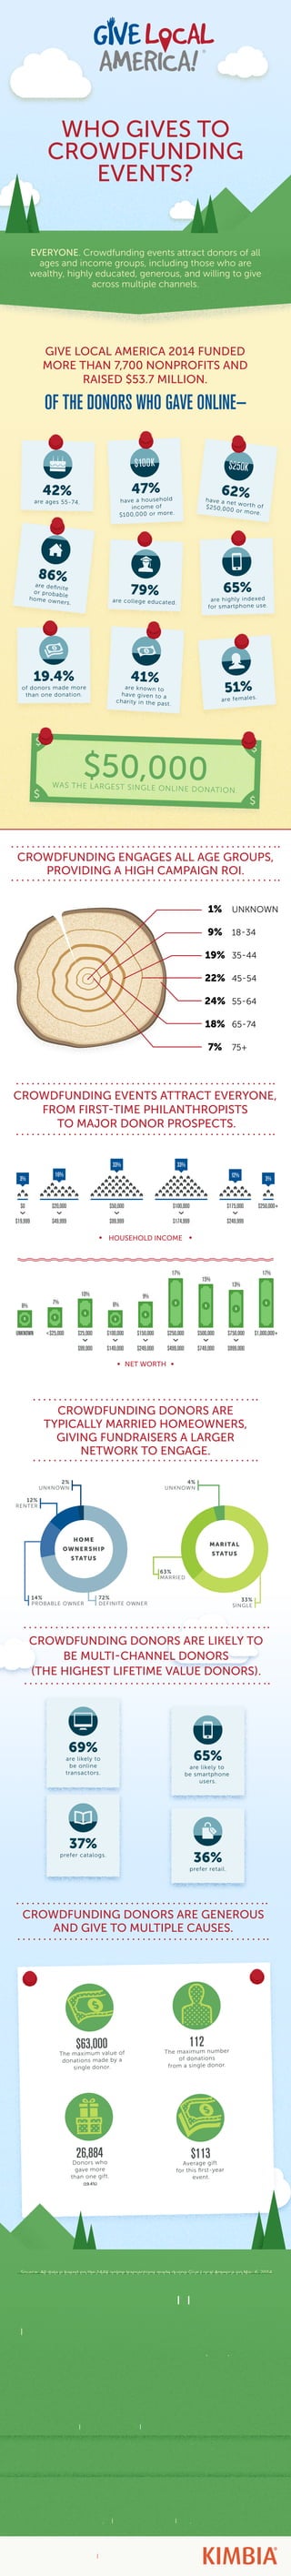 WHO GIVES TO 
CROWDFUNDING 
EVENTS? 
EVERYONE. Crowdfunding events attract donors of all 
ages and income groups, including those who are 
wealthy, highly educated, generous, and willing to give 
across multiple channels. 
GIVE LOCAL AMERICA 2014 FUNDED 
MORE THAN 7,700 NONPROFITS AND 
RAISED $53.7 MILLION. 
OF THE DONORS WHO GAVE ONLINE— 
62% 
have a net worth of 
$250,000 or more. 
65% 
are highly indexed 
for smartphone use. 
47% 
have a household 
income of 
$100,000 or more. 
42% 
are ages 55-74. 
CROWDFUNDING ENGAGES ALL AGE GROUPS, 
PROVIDING A HIGH CAMPAIGN ROI. 
CROWDFUNDING EVENTS ATTRACT EVERYONE, 
12% 
RENTER 
FROM FIRSTTIME PHILANTHROPISTS 
TO MAJOR DONOR PROSPECTS. 
2% 
UNKNOWN 
UNKNOWN 
1834 
3544 
22% 4554 
65% 
are likely to 
be smartphone 
users. 
CROWDFUNDING DONORS ARE GENEROUS 
AND GIVE TO MULTIPLE CAUSES. 
3% 
16% 
33% 33% 
12% 3% 
$0 
$19,999 
$20,000 
$49,999 
$50,000 
$99,999 
$100,000 
$174,999 
$175,000 
$249,999 
$250,000+ 
UNKNOWN $25,000 $25,000 
$99,000 
$100,000 
$149,000 
$150,000 
$249,000 
$250,000 
$499,000 
$500,000 
$749,000 
$750,000 
$999,000 
$1,000,000+ 
HOUSEHOLD INCOME 
NET WORTH 
6% 
$ 
CROWDFUNDING DONORS ARE 
TYPICALLY MARRIED HOMEOWNERS, 
GIVING FUNDRAISERS A LARGER 
NETWORK TO ENGAGE. 
HOME 
OWNERSHIP 
STATUS 
MARITAL 
STATUS 
33% 
SINGLE 
63% 
MARRIED 
4% 
UNKNOWN 
72% 
DEFINITE OWNER 
14% 
PROBABLE OWNER 
$63,000 
The maximum value of 
donations made by a 
single donor. 
112 
The maximum number 
of donations 
from a single donor. 
26,884 
Donors who 
gave more 
than one gift. 
19.4% 
$113 
Average gift 
for this first-year 
event. 
51% 
are females. 
86% 
are definite 
or probable 
home owners. 
19.4% 
of donors made more 
than one donation. 
79% 
are college educated. 
41% 
are known to 
have given to a 
charity in the past. 
$50,000 
WAS THE LARGEST SINGLE ONLINE DONATION. 
1% 
9% 
19% 
24% 
5564 
6574 
75+ 
18% 
7% 
69% 
are likely to 
be online 
transactors. 
37% 
prefer catalogs. 36% 
prefer retail. 
SO WHAT ARE YOU WAITING FOR? 
If you’re interested in joining Give Local America or hosting 
your own Giving Day, contact Lori Finch, Vice President of 
Community Giving, at lori@kimbia.com. 
MARK YOUR CALENDAR 
FOR THE NEXT GIVE LOCAL AMERICA ON 
MAY 5, 2015 
WWW.G I V E LO C A L A M E R I C A .ORG 
O R G A N I Z E D A N D P O W E R E D B Y 
$ 
6% 
10% 
7% 
9% 
17% 
15% 
13% 
17% 
$ 
$ 
$ 
$ 
$ 
$ 
CROWDFUNDING DONORS ARE LIKELY TO 
BE MULTICHANNEL DONORS 
THE HIGHEST LIFETIME VALUE DONORS. 
Source: All data is based on the 144K online transactions made during Give Local America on May 6, 2014. 
#givelocal15 
$ 
